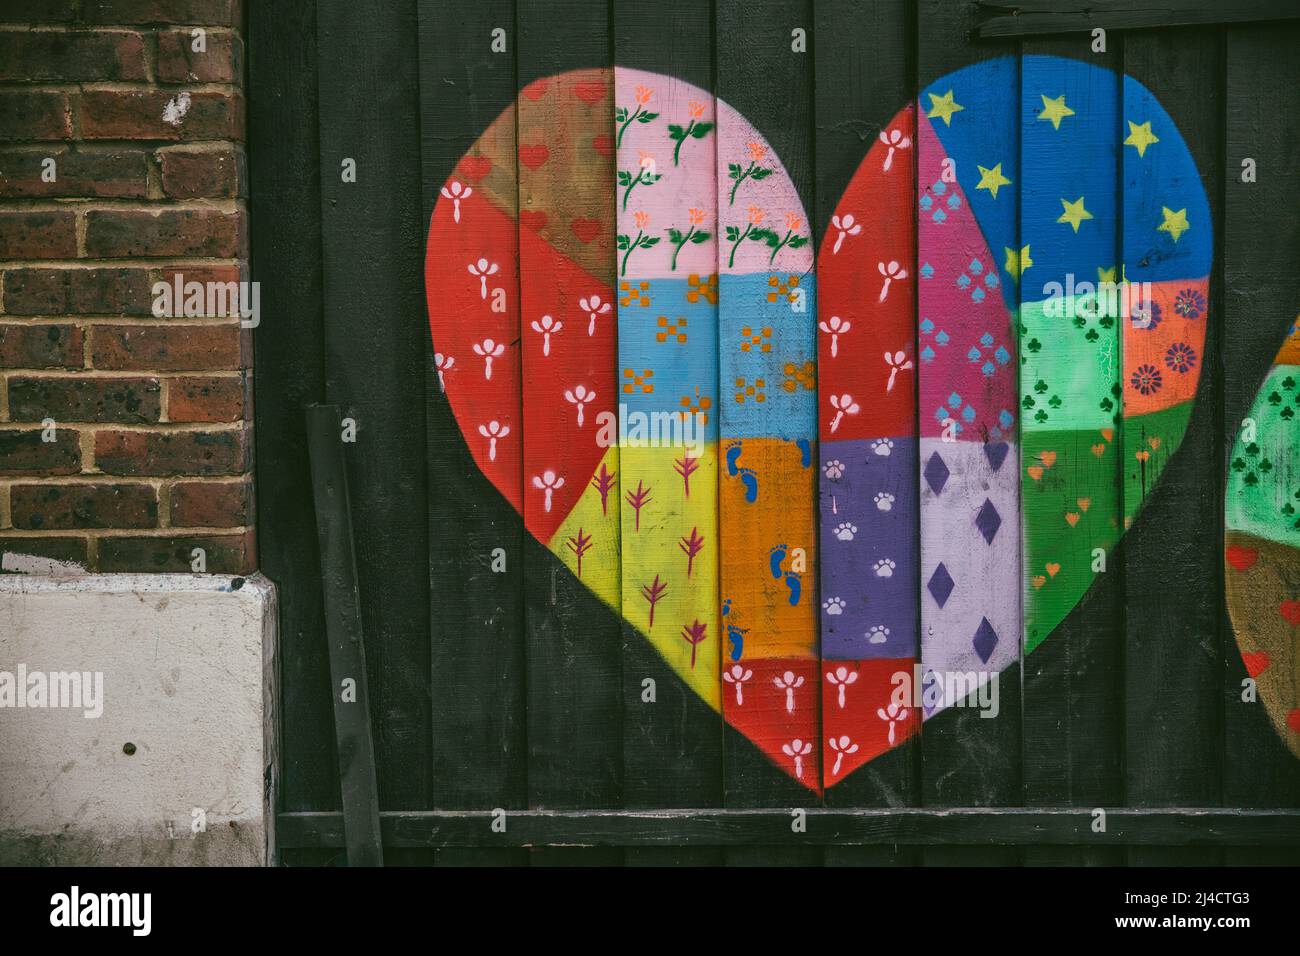 Shoreditch, London, UK - April 14, 2016: Colourful street art rendition of a heart, captured in Shoreditch, East London. Stock Photo